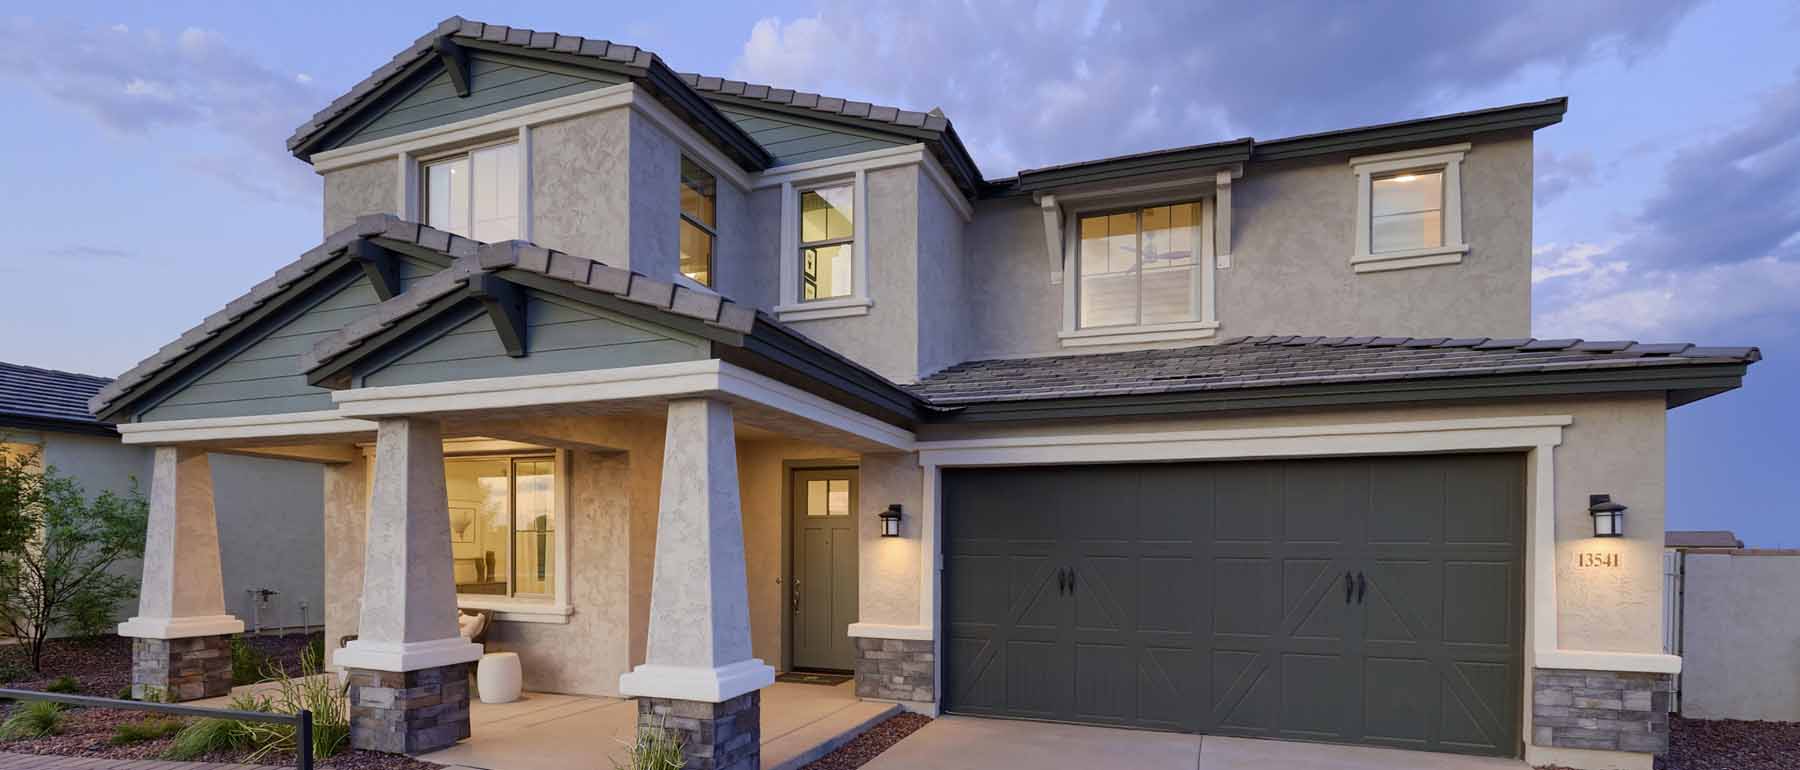 Homes by Towne properties